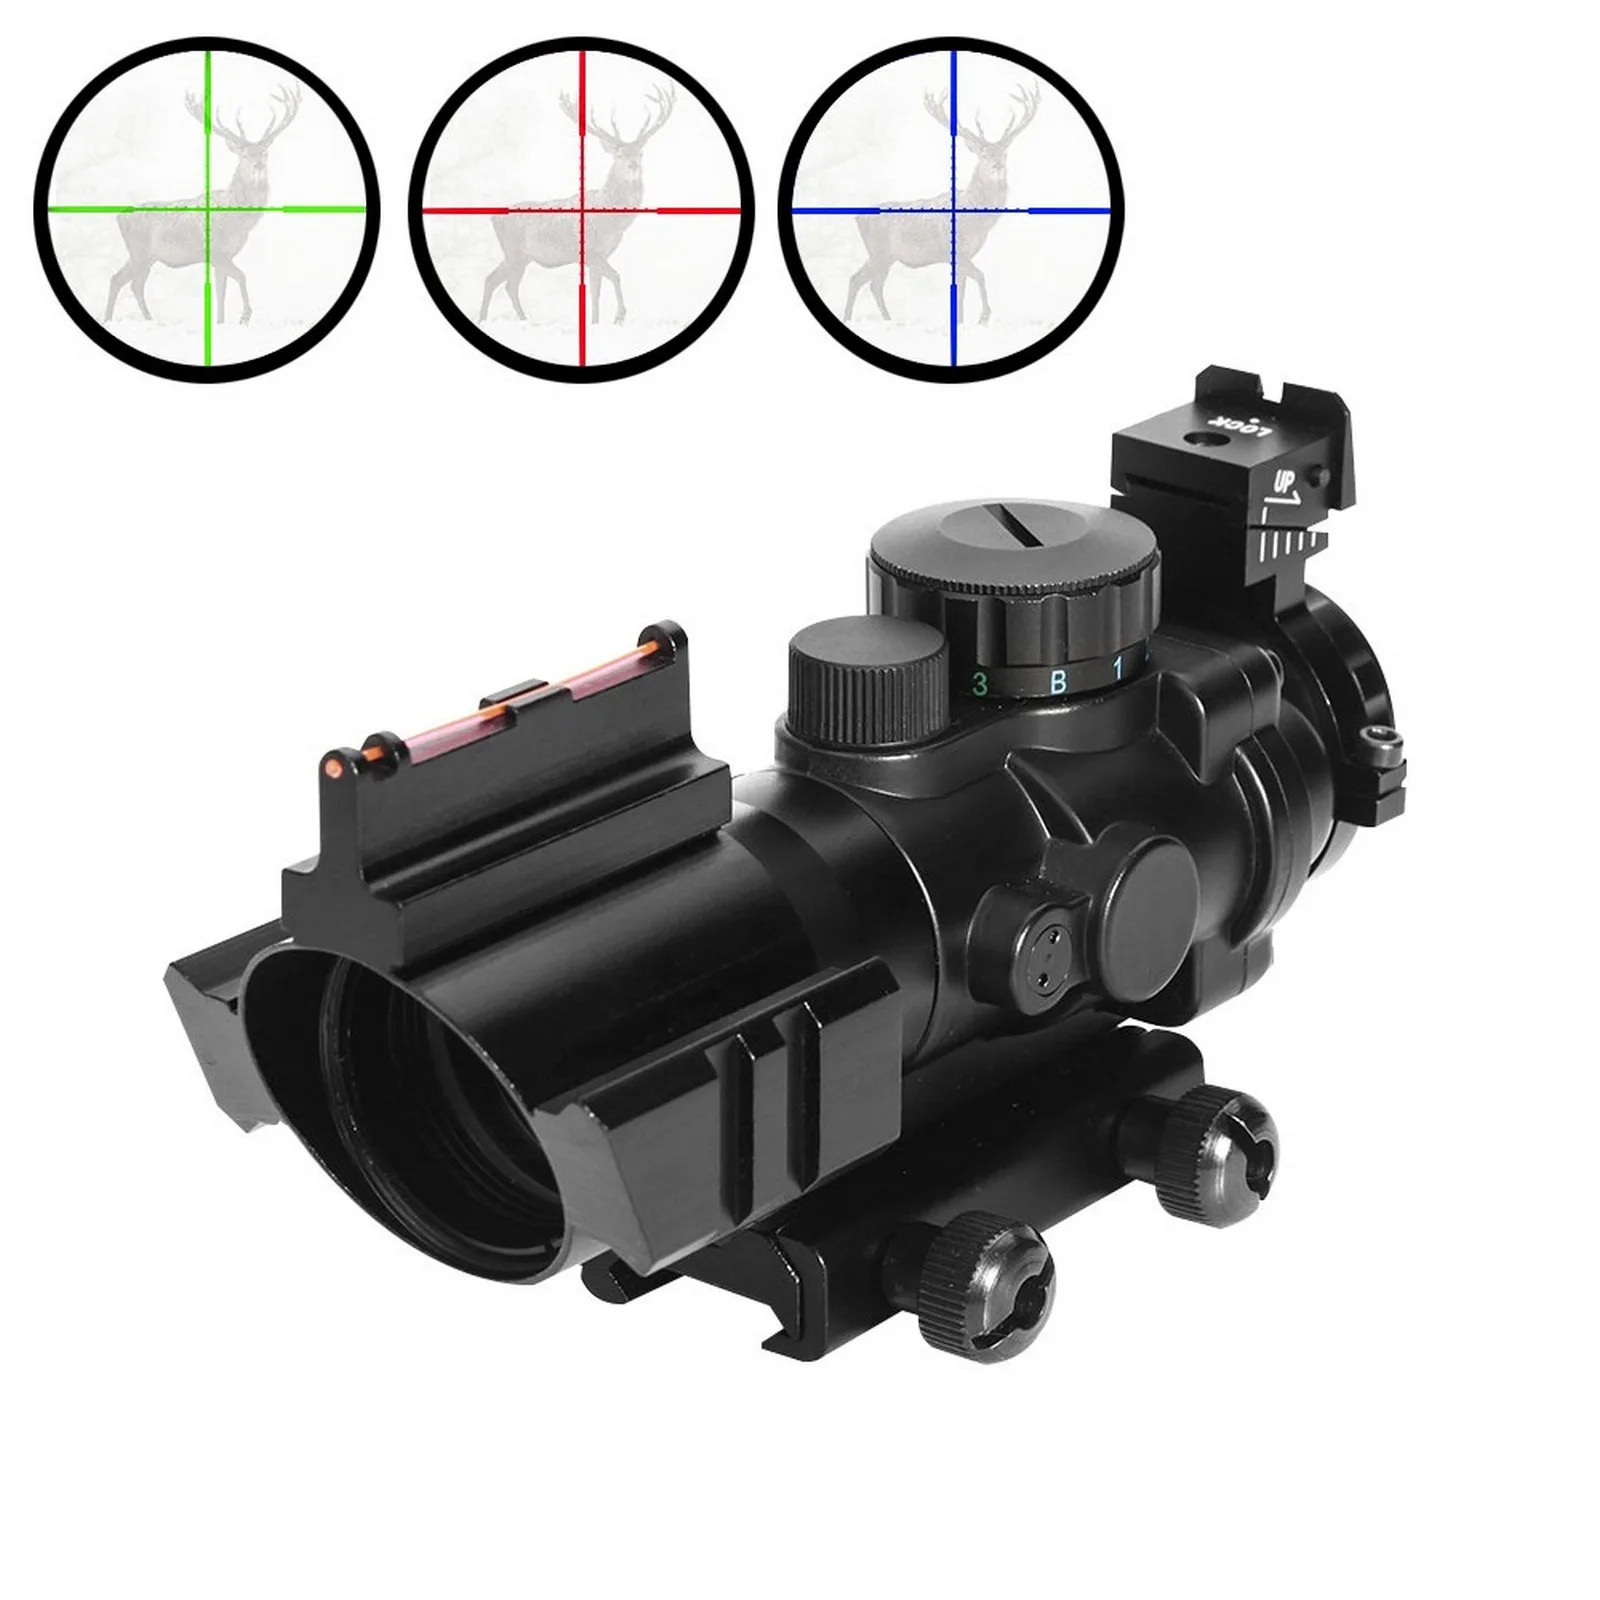 

4x32 Tactical Red Green Dot Riflescope Hunting Optic Sight with 20mm Rail Airsoft Sniper Reflex Scope Gun Rifle Collimator